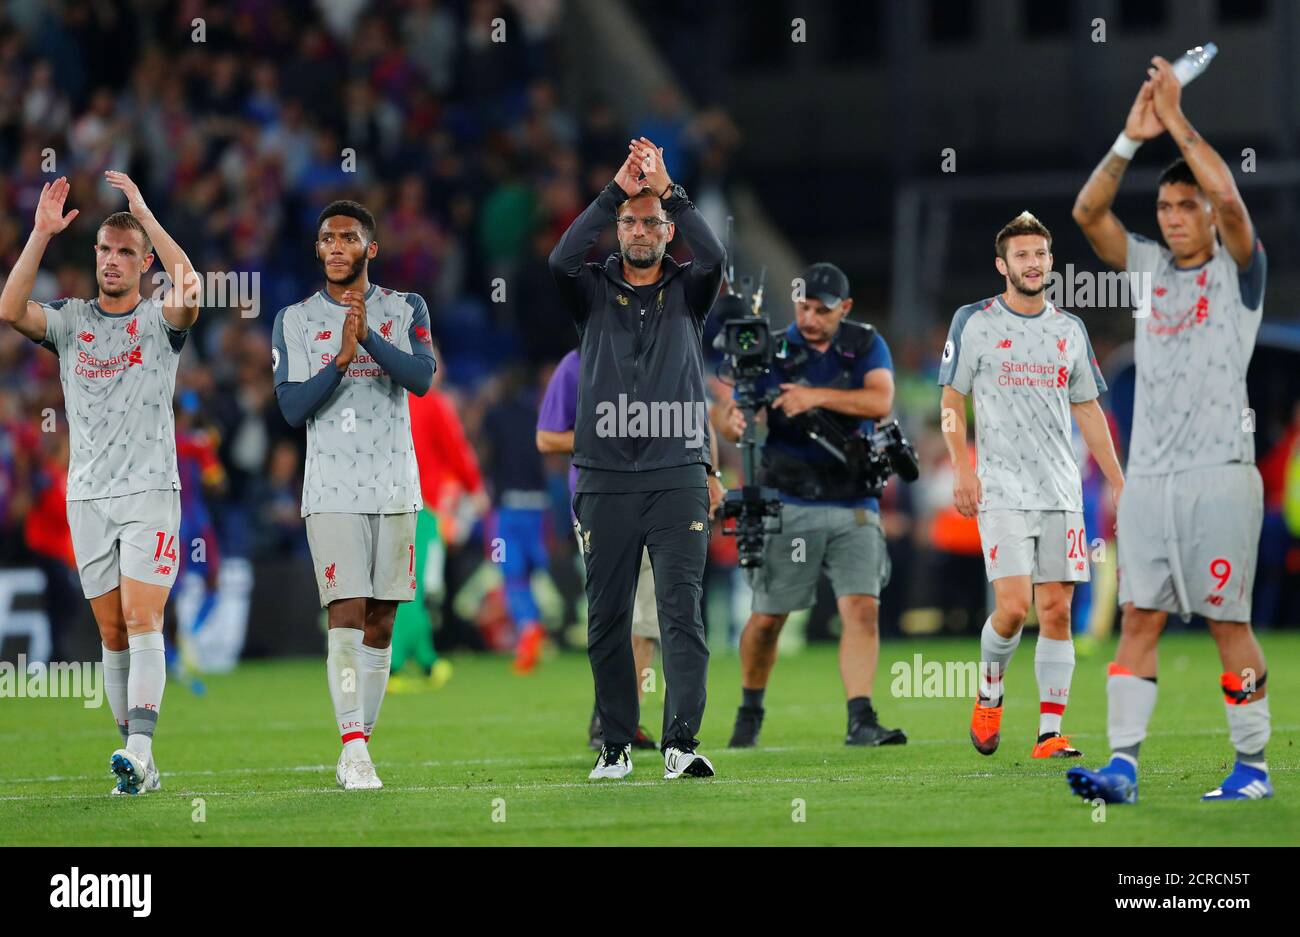 Soccer Football - Premier League - Crystal Palace v Liverpool - Selhurst Park, London, Britain - August 20, 2018  Liverpool players and manager Juergen Klopp applaud fans after the match                      REUTERS/Eddie Keogh  EDITORIAL USE ONLY. No use with unauthorized audio, video, data, fixture lists, club/league logos or "live" services. Online in-match use limited to 75 images, no video emulation. No use in betting, games or single club/league/player publications.  Please contact your account representative for further details. Stock Photo